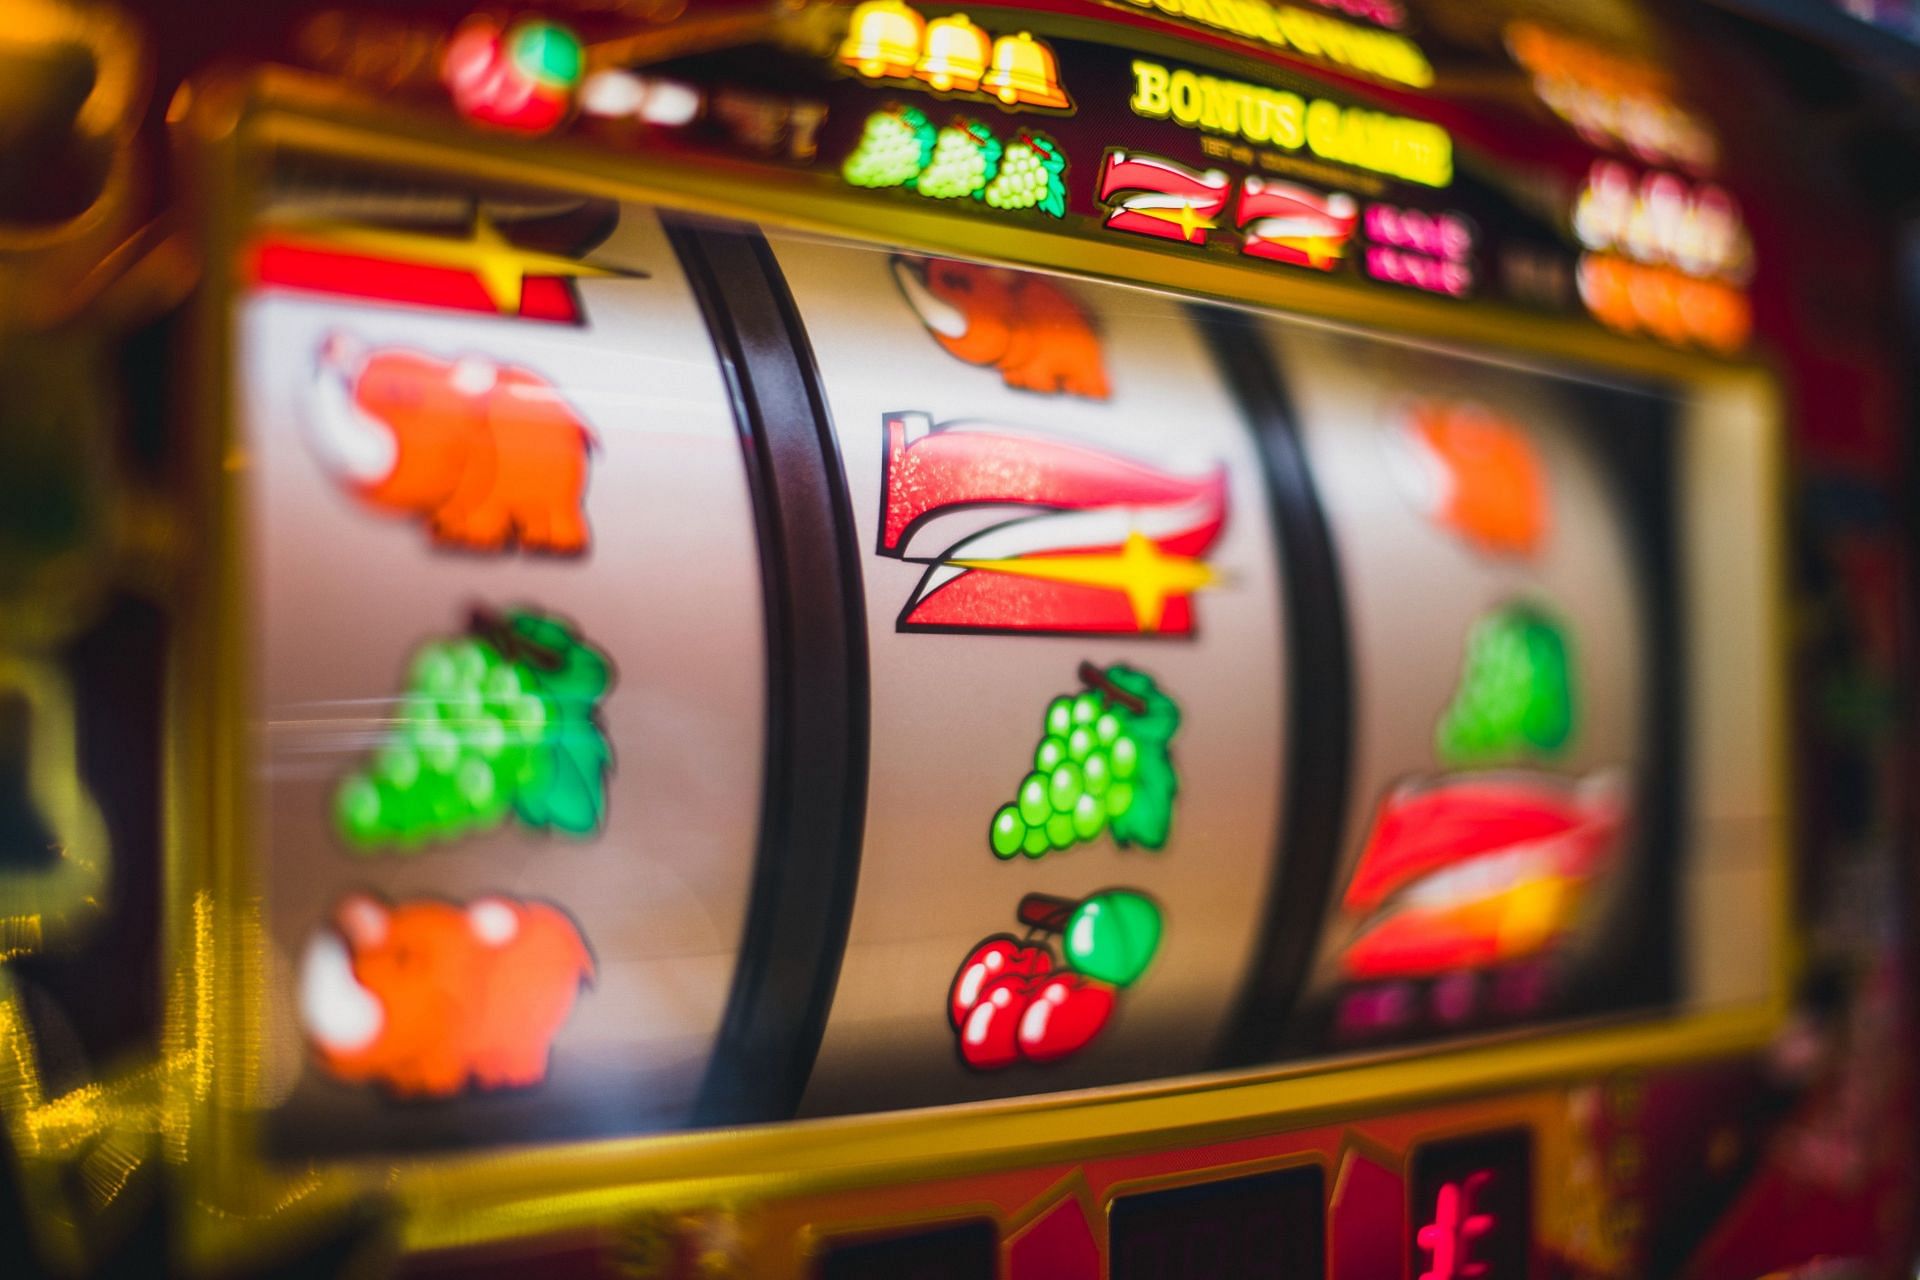 The slots may seem fascinating, but regulation is the only way to protect yourself. (Image via Freepik/ Freepik)